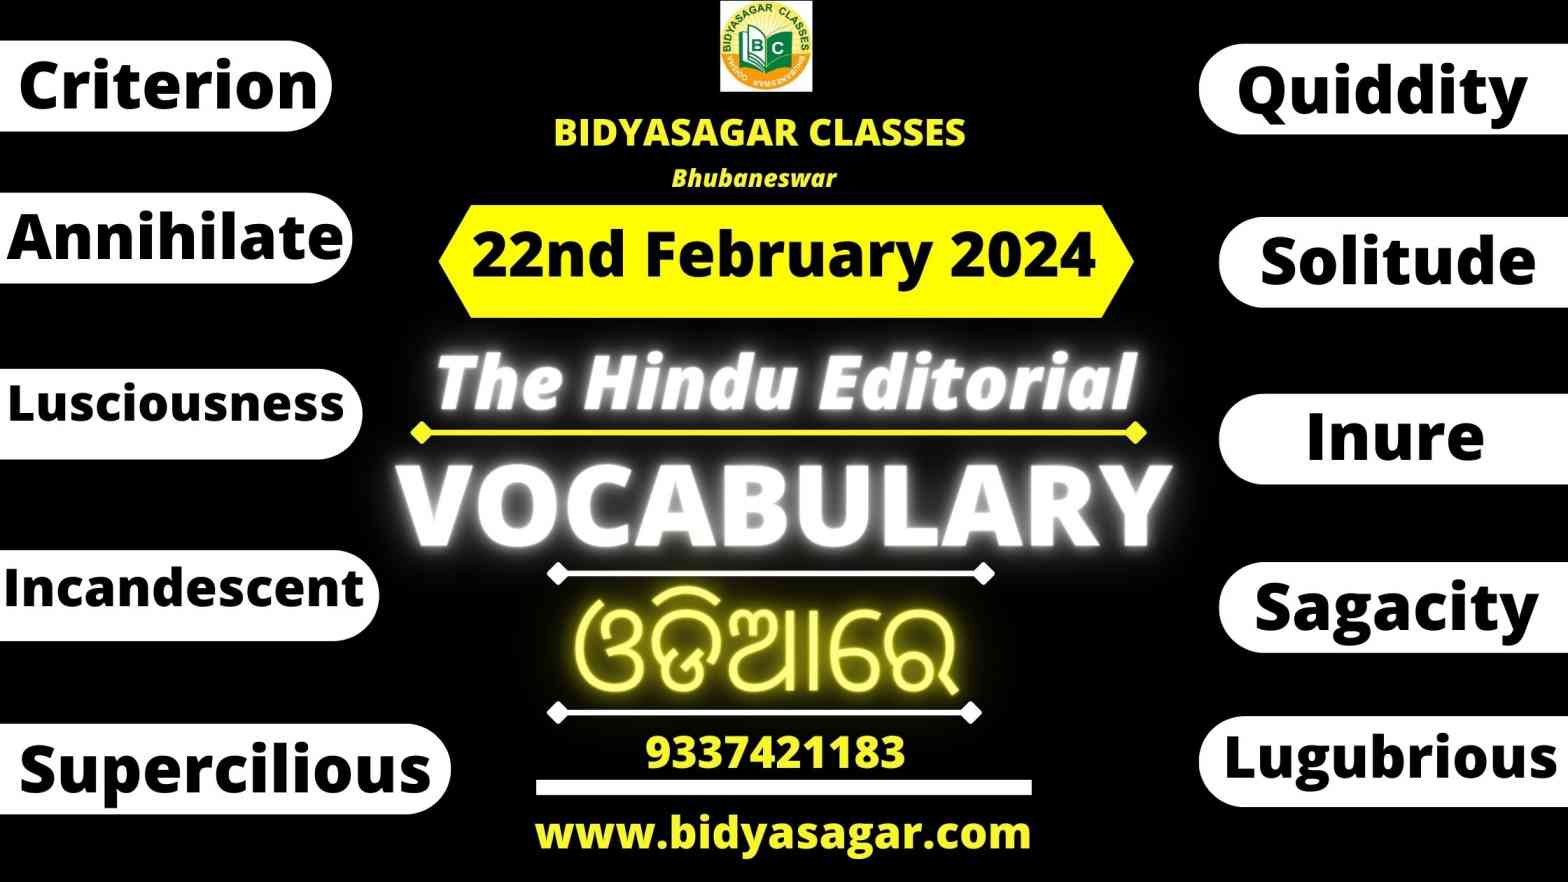 The Hindu Editorial Vocabulary of 22nd February 2024